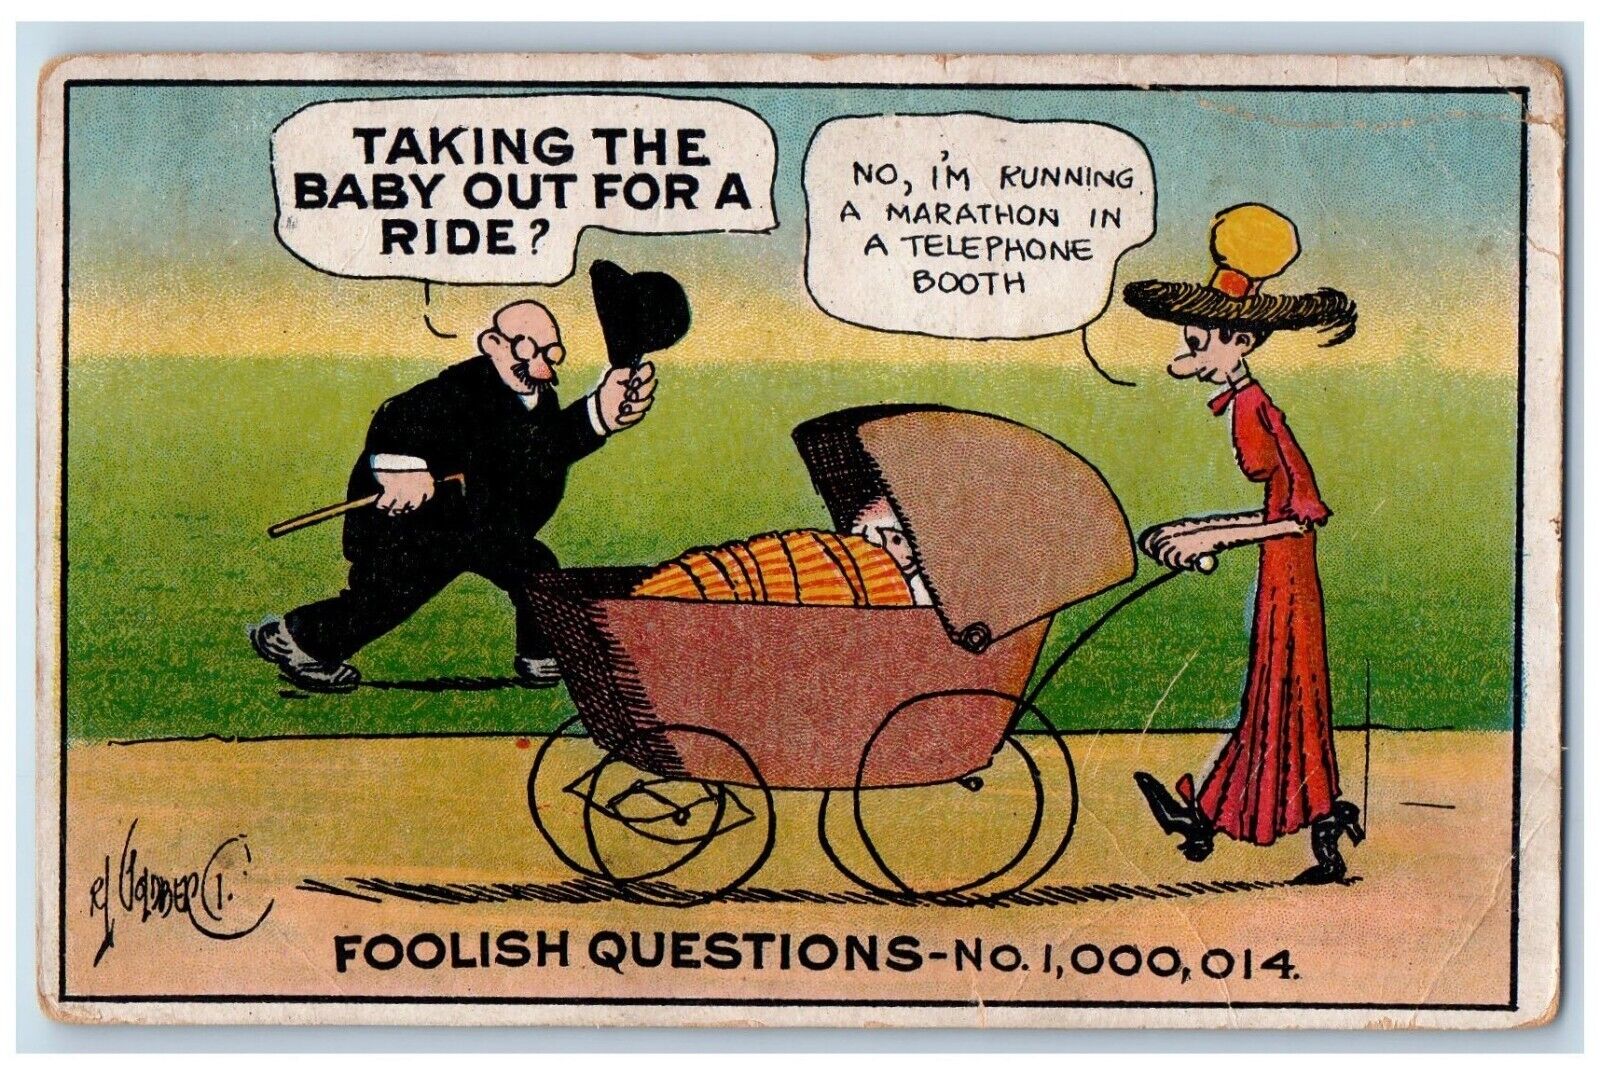 DPO De Lamere ND Postcard Comic Humor Foolish Question Taking Baby Out For Ride